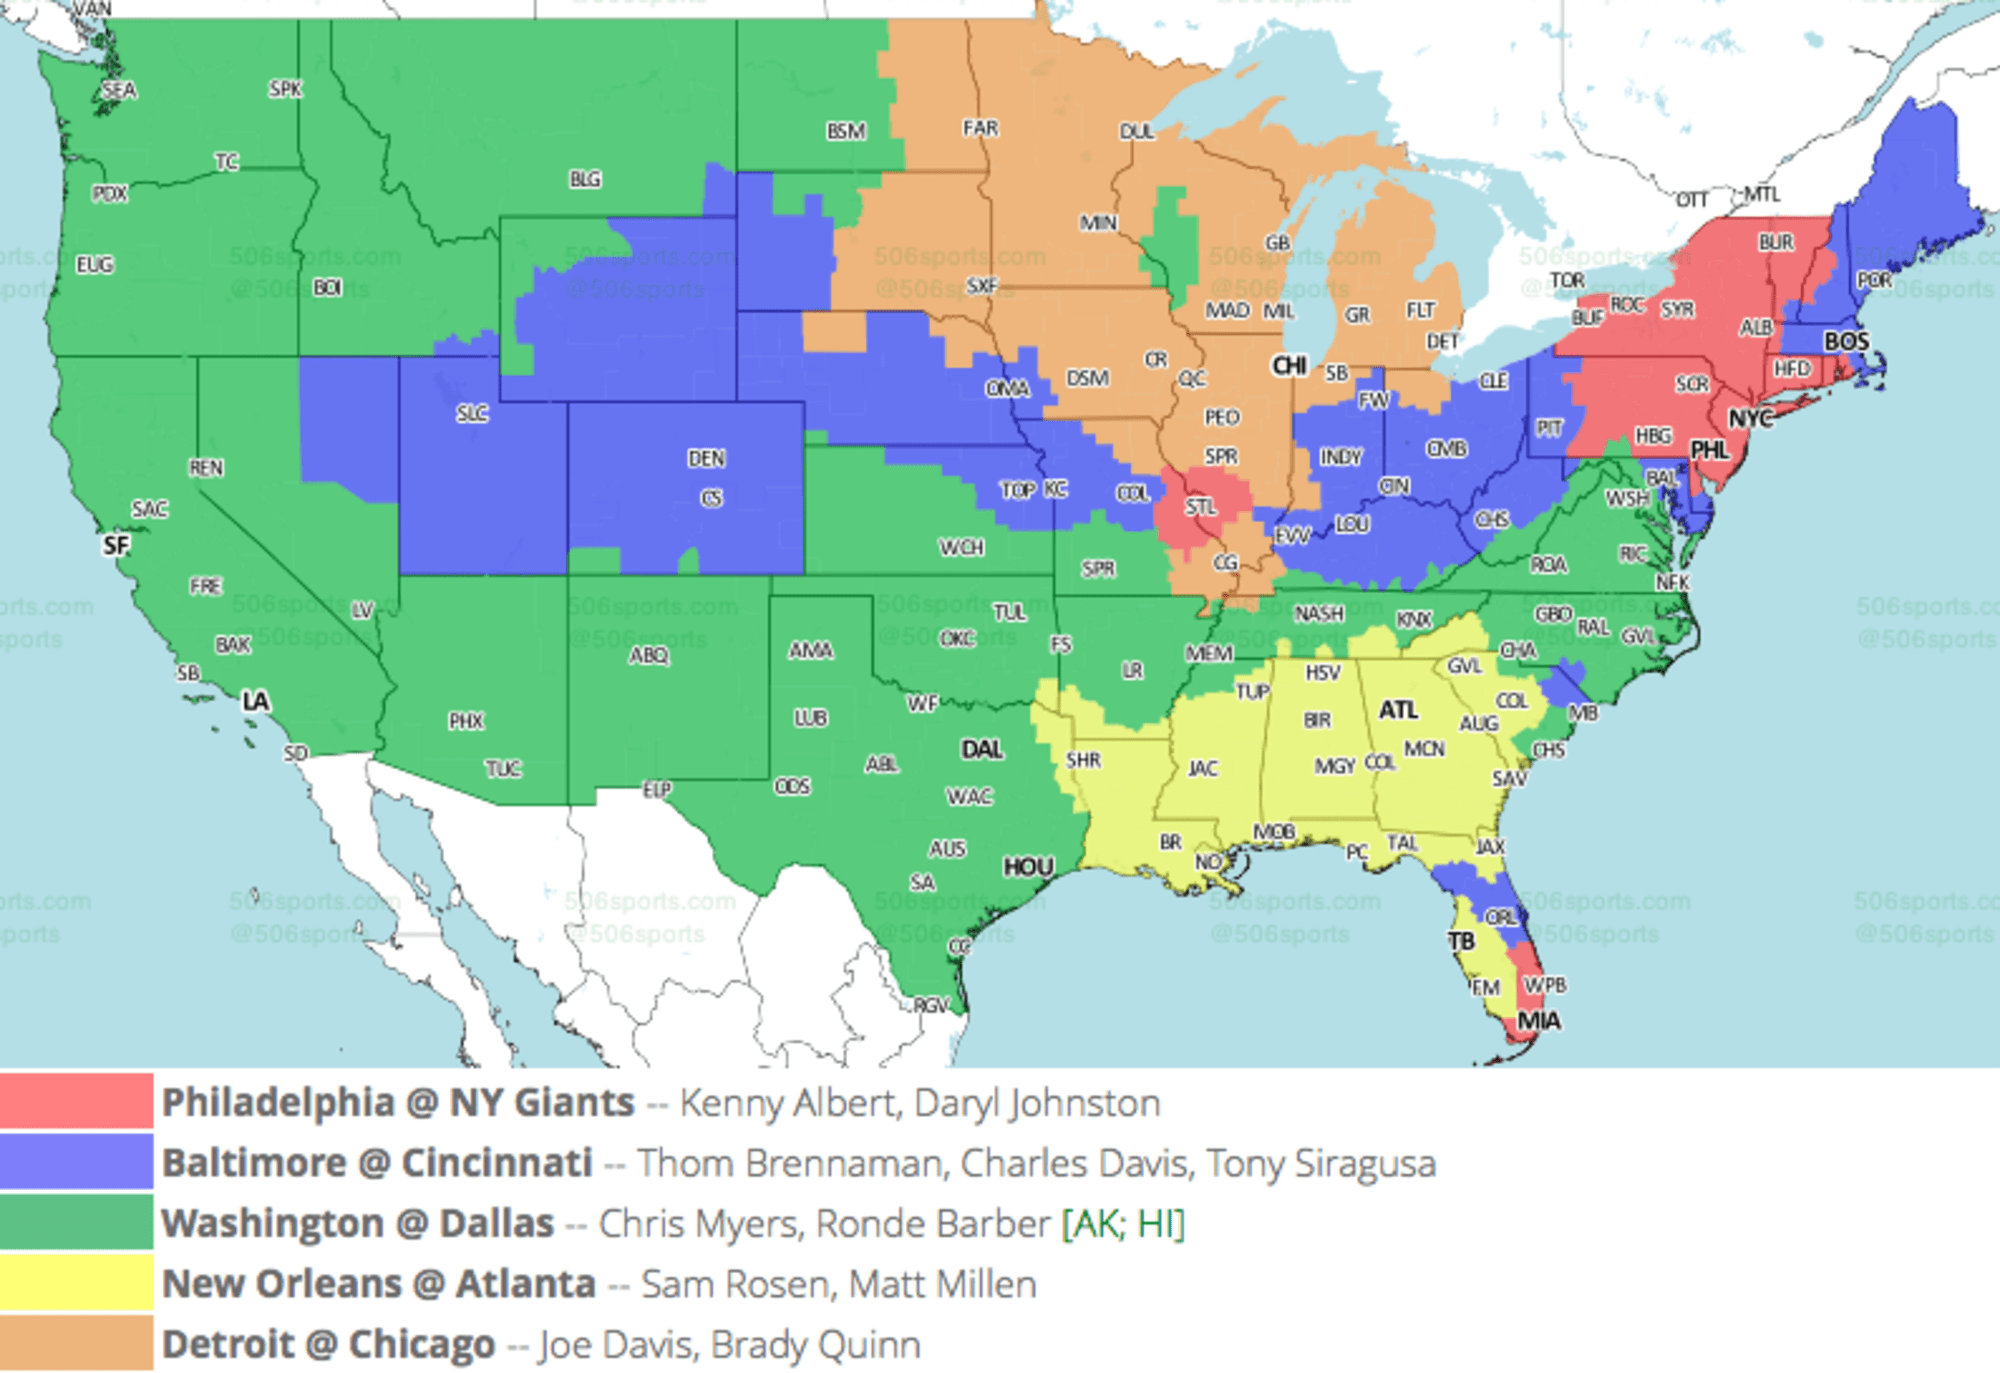 NFL TV Maps for Week 17